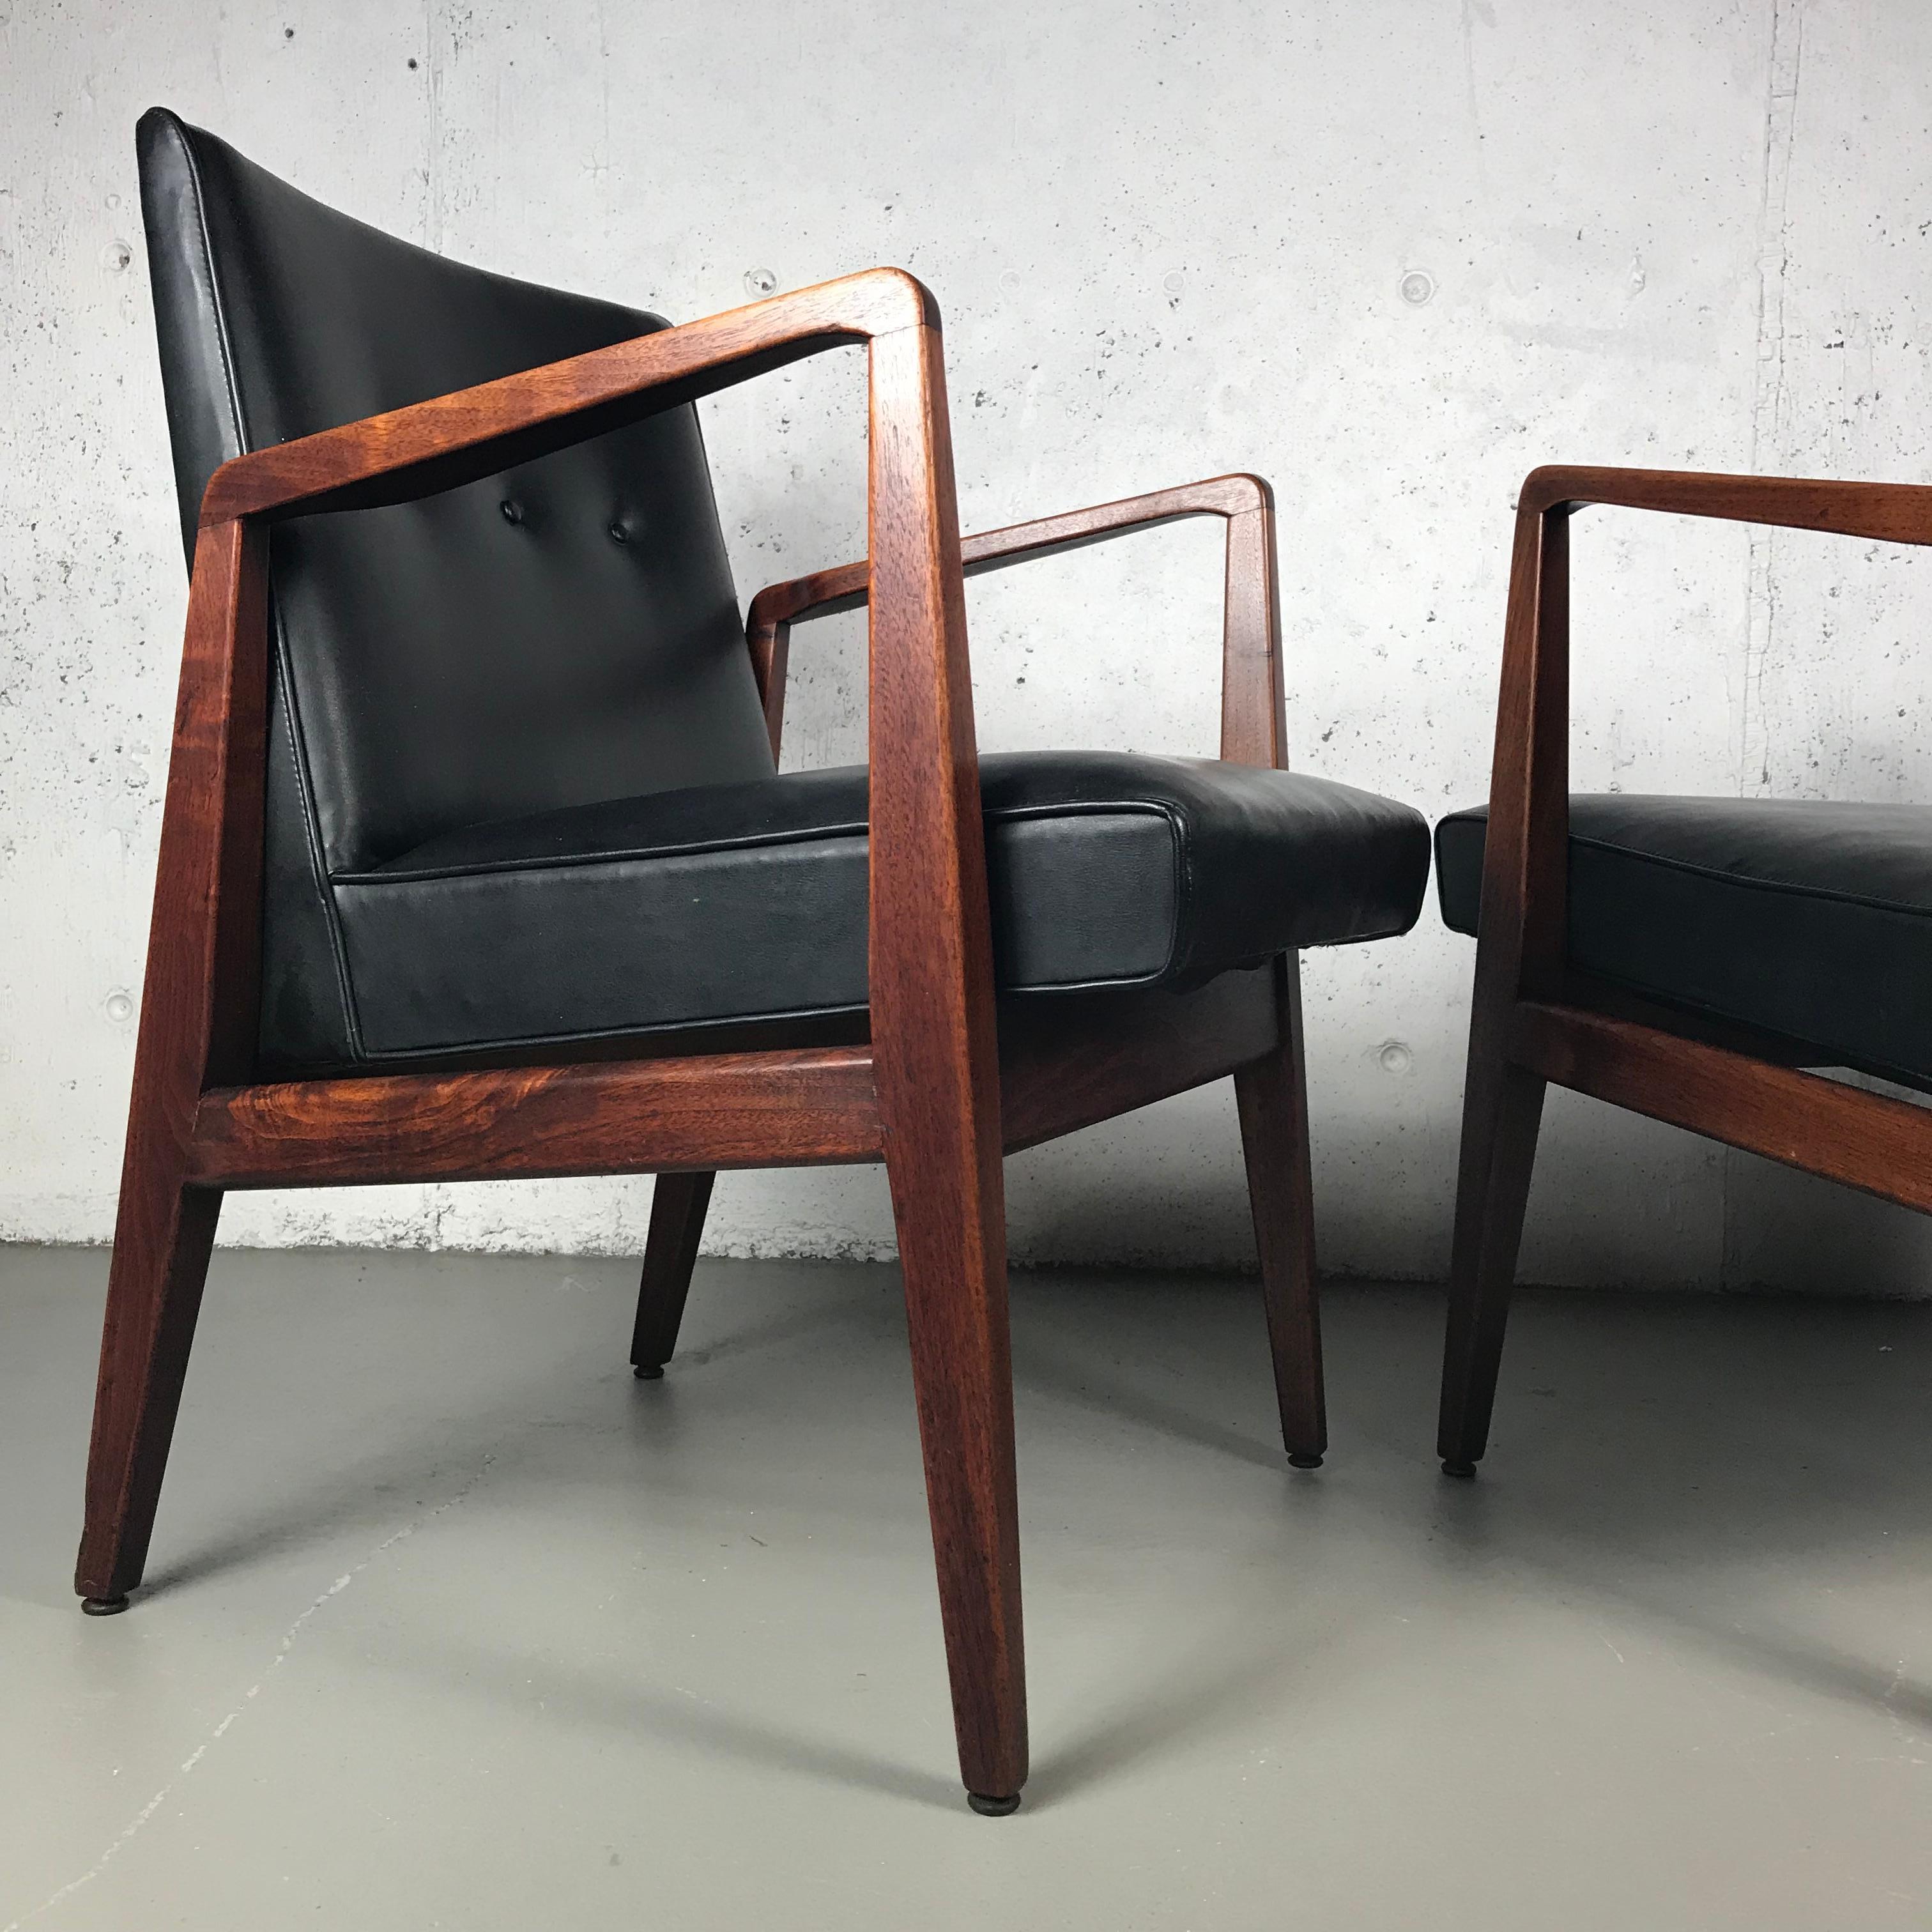 Beautiful pair of occasional or lounge chairs in walnut and black vinyl designed by Jens Risom for Jens Risom Designs. These chairs are in original condition and the walnut has wonderful dark swirling grain. Minor scuffs to the legs and black vinyl